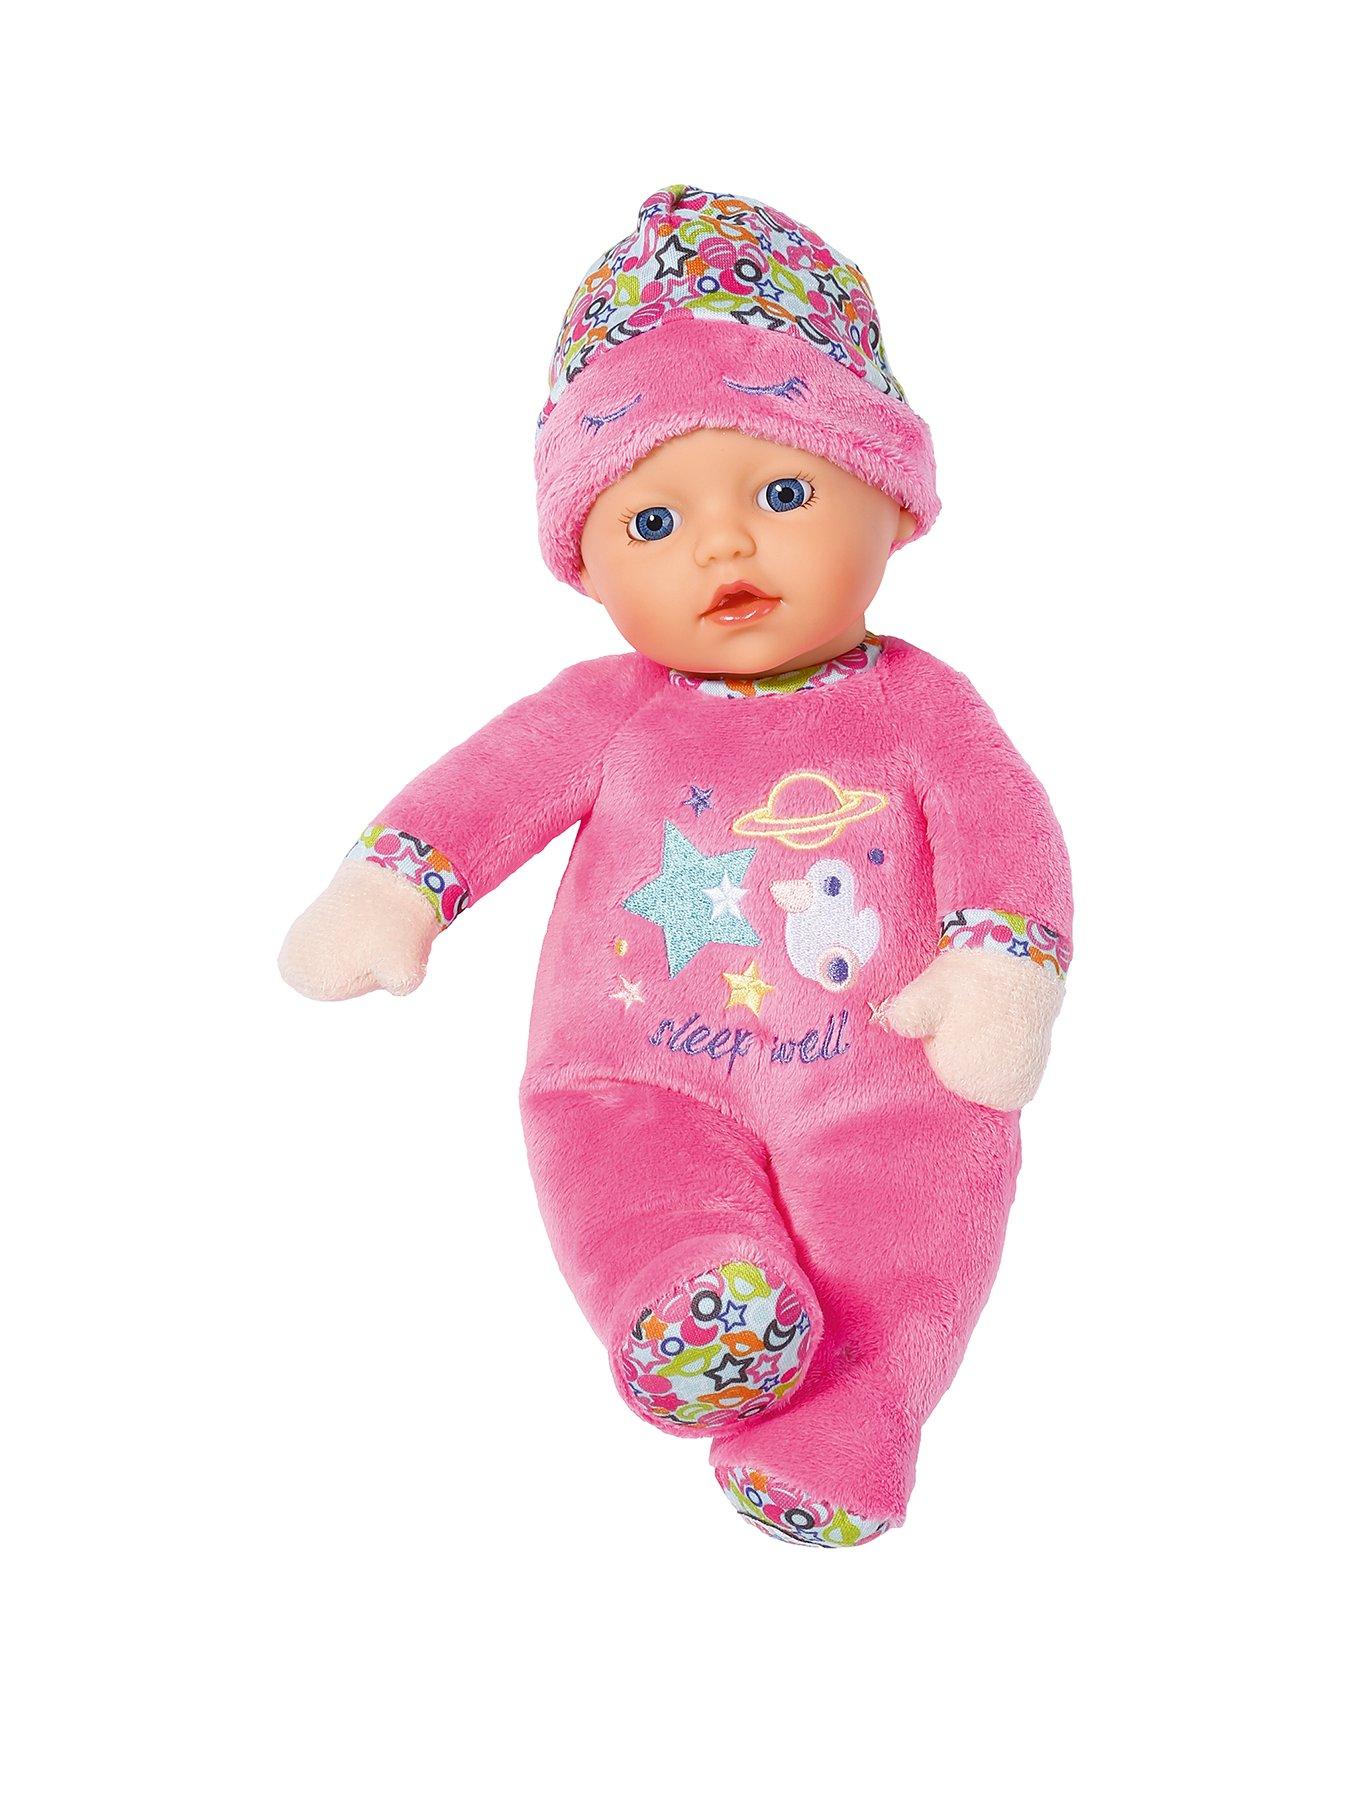 cheapest baby born sister doll